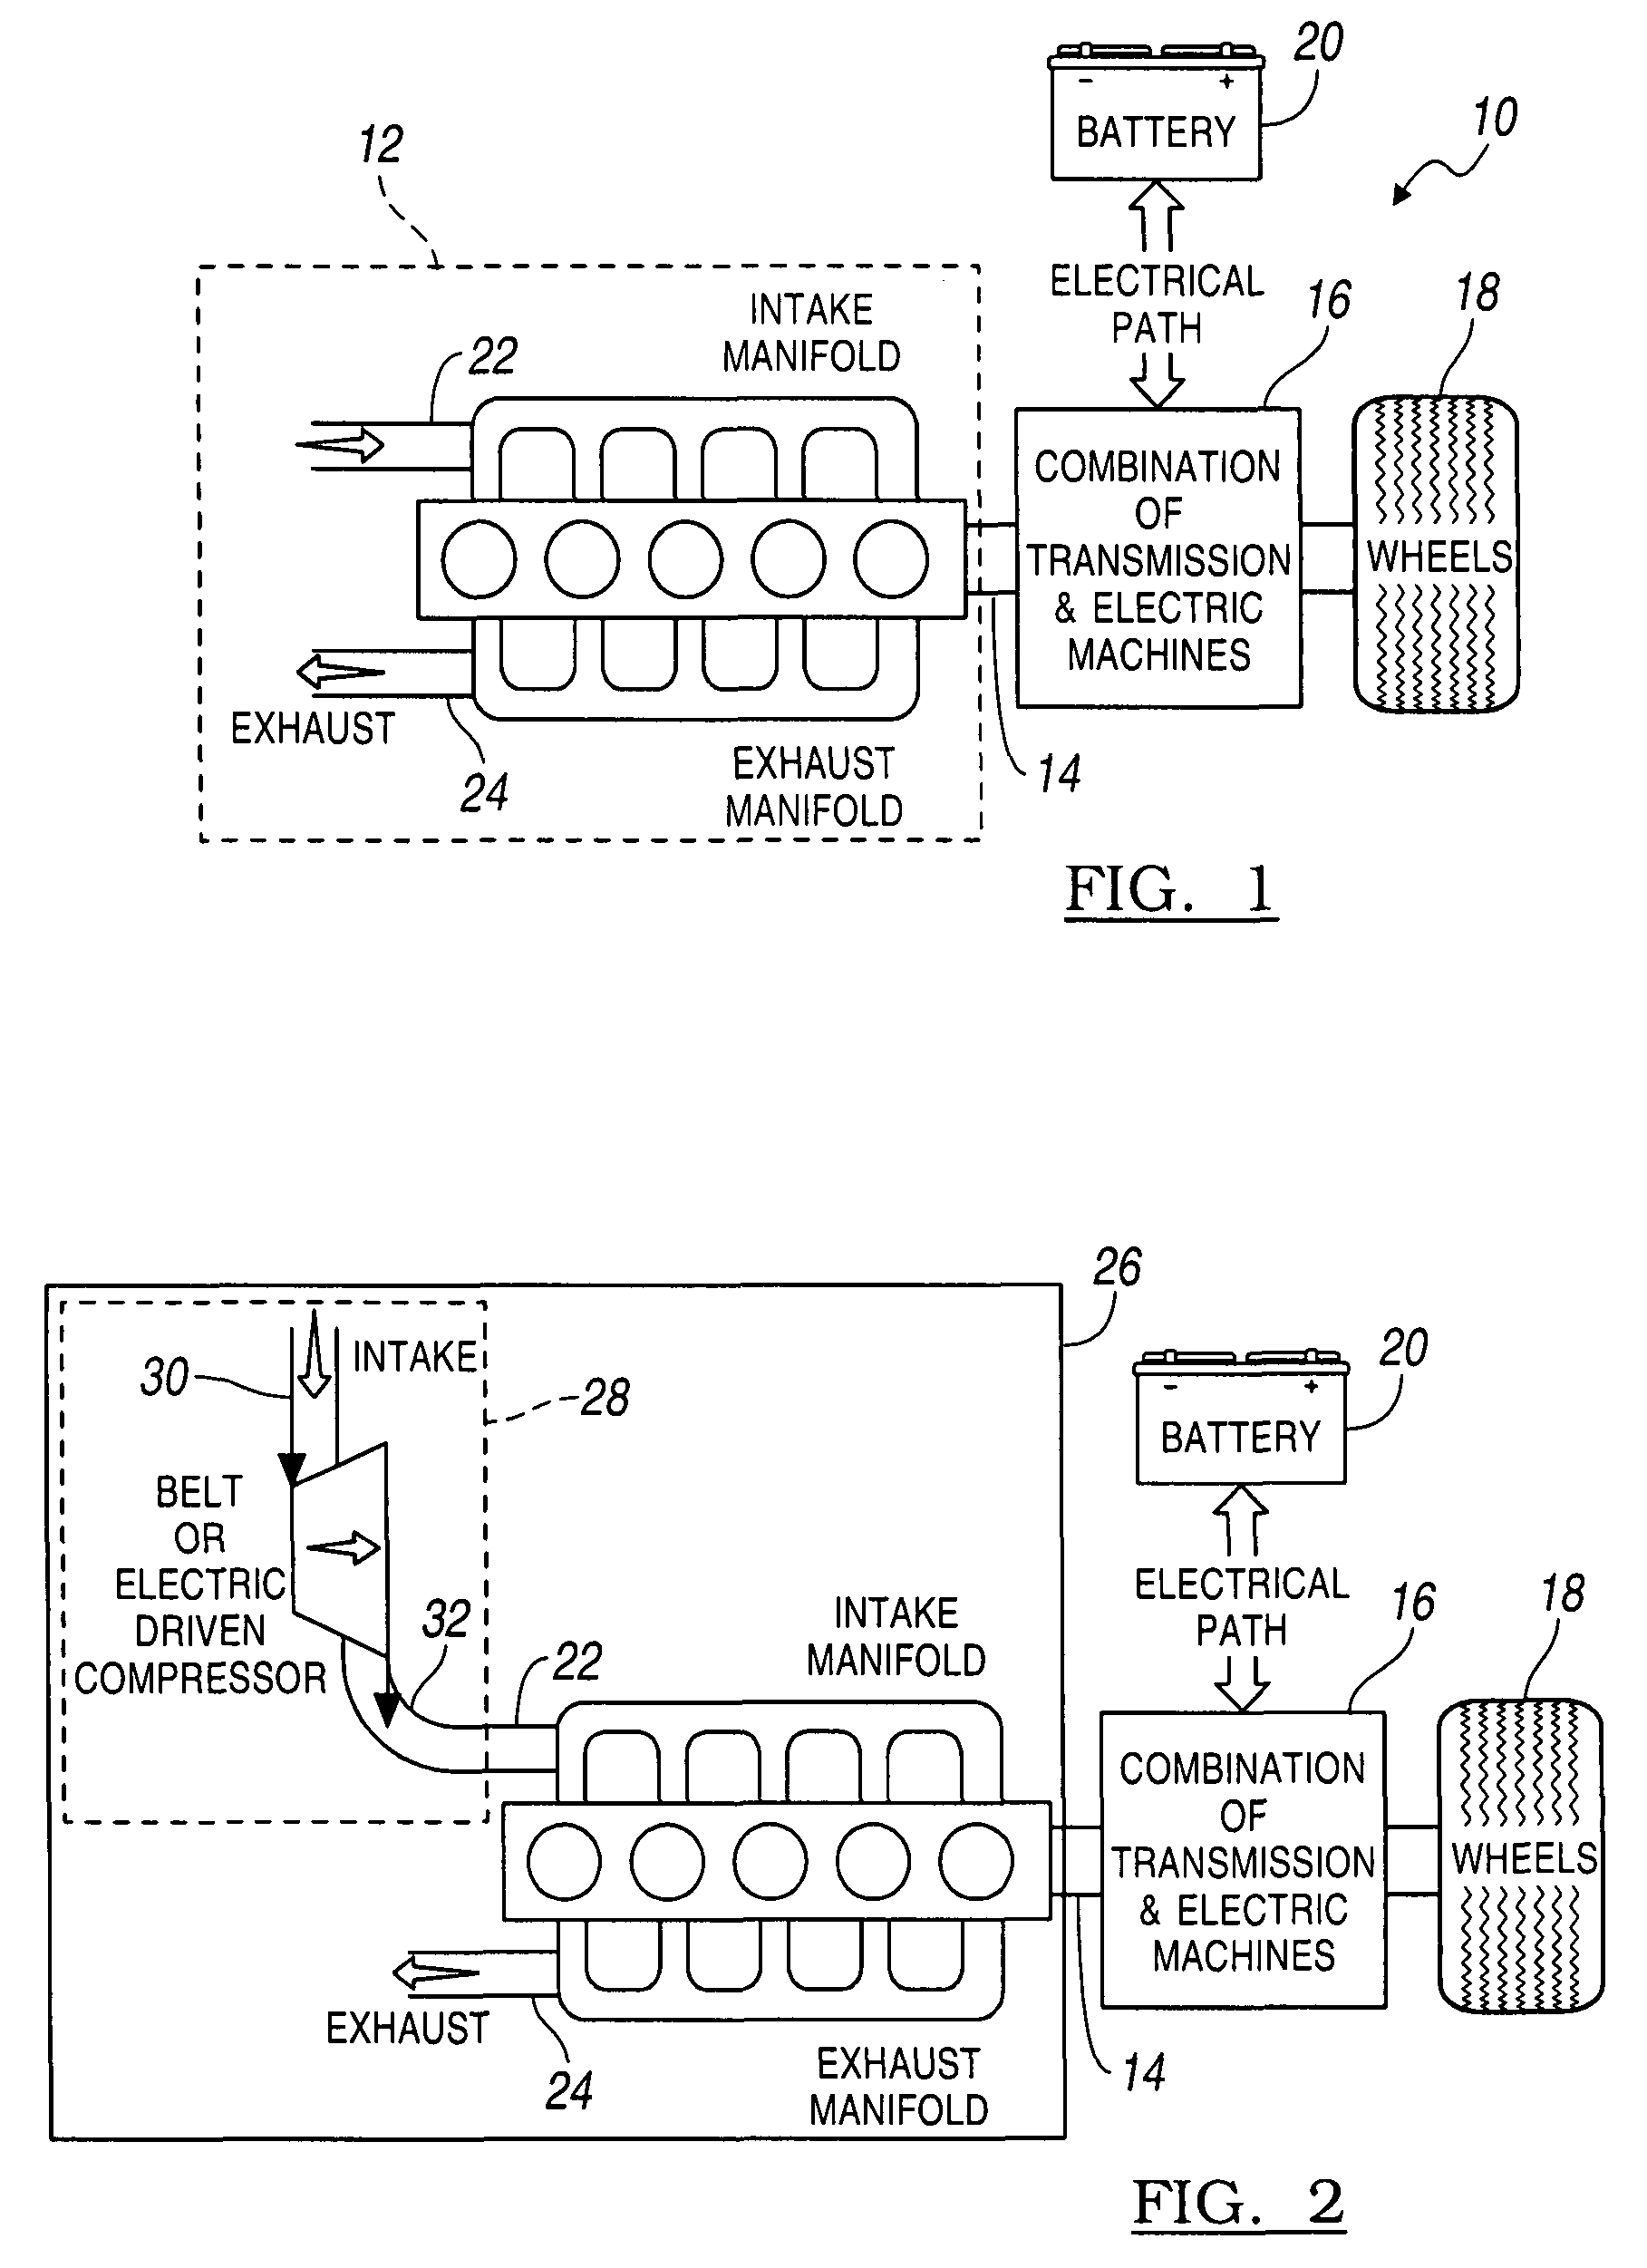 Electrical assist for reducing emissions and torsion response delay in a hybrid electric vehicle